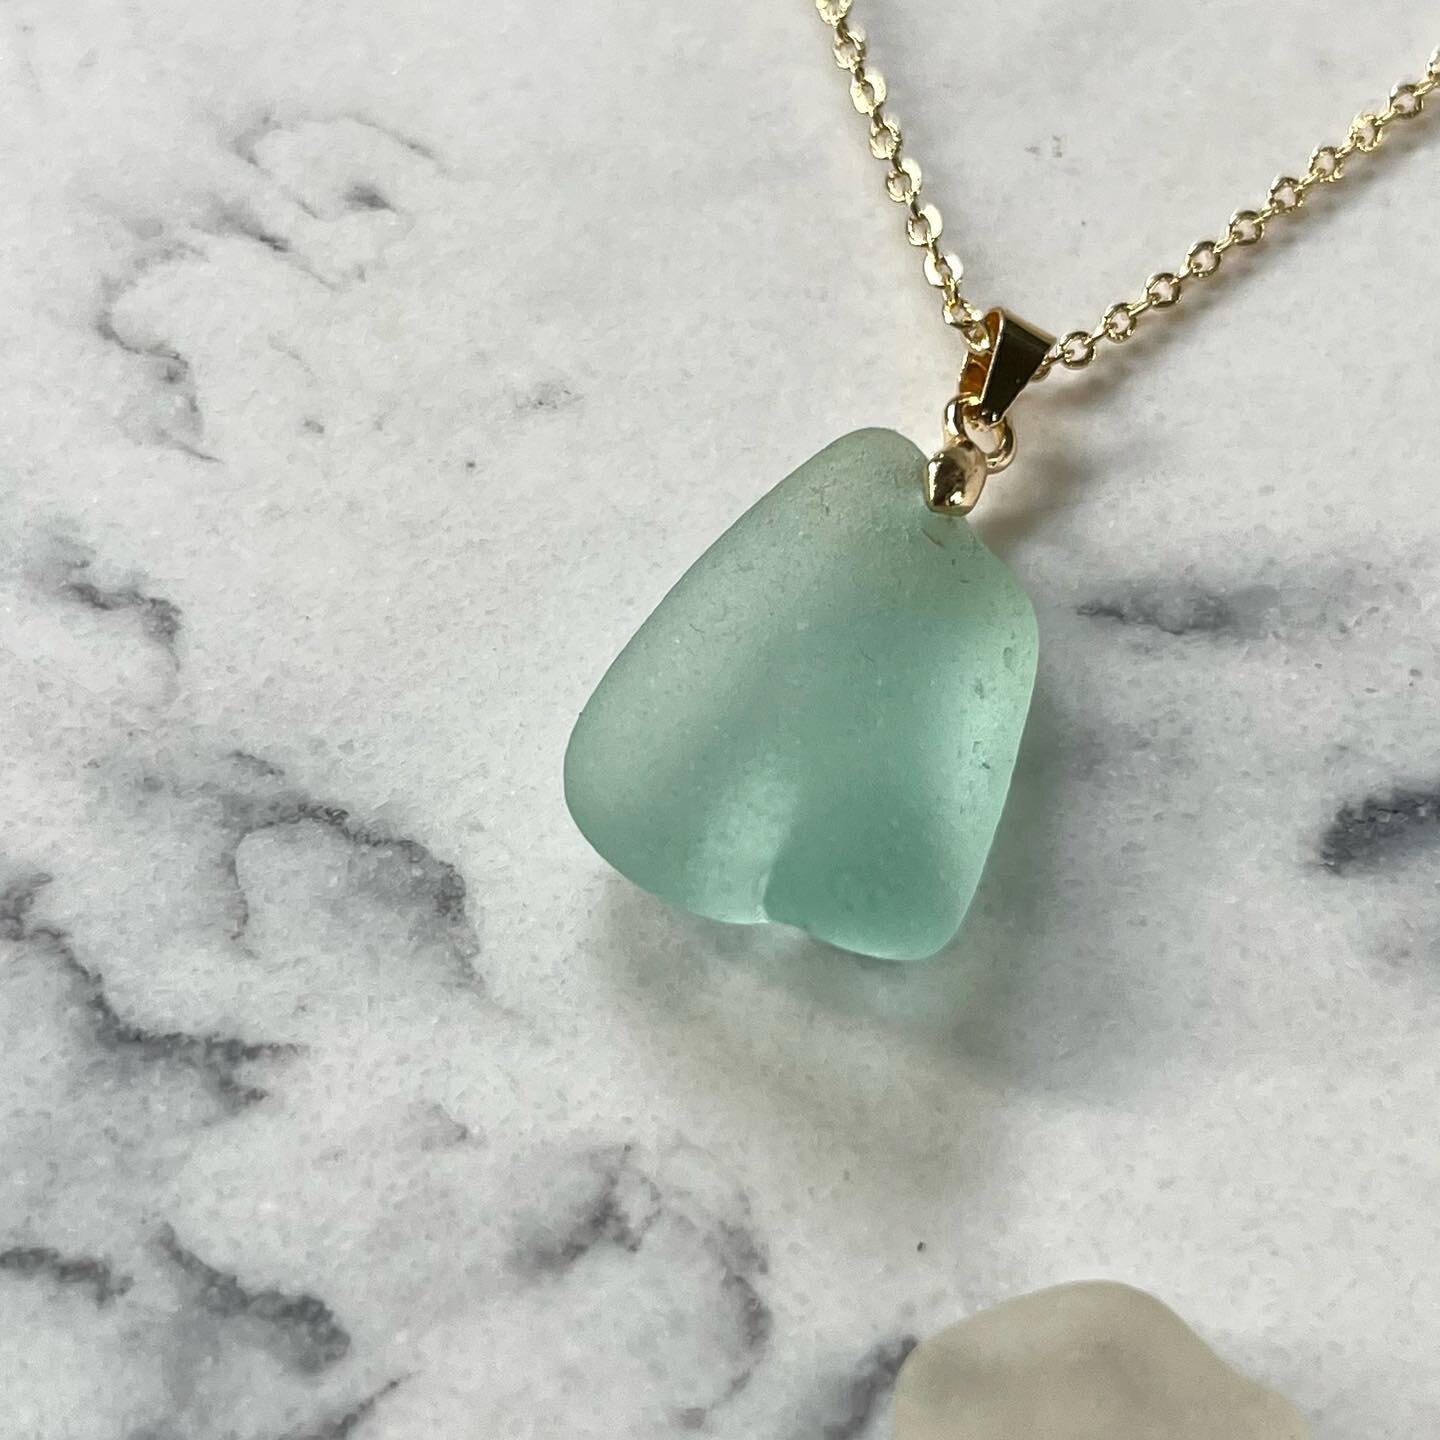 B E A C H  B U M 🍑

🩵 How cute is this aqua piece with a little chonky butt?! 

⏰ Available in the Seafoam Easter Collection drop next Wednesday evening!